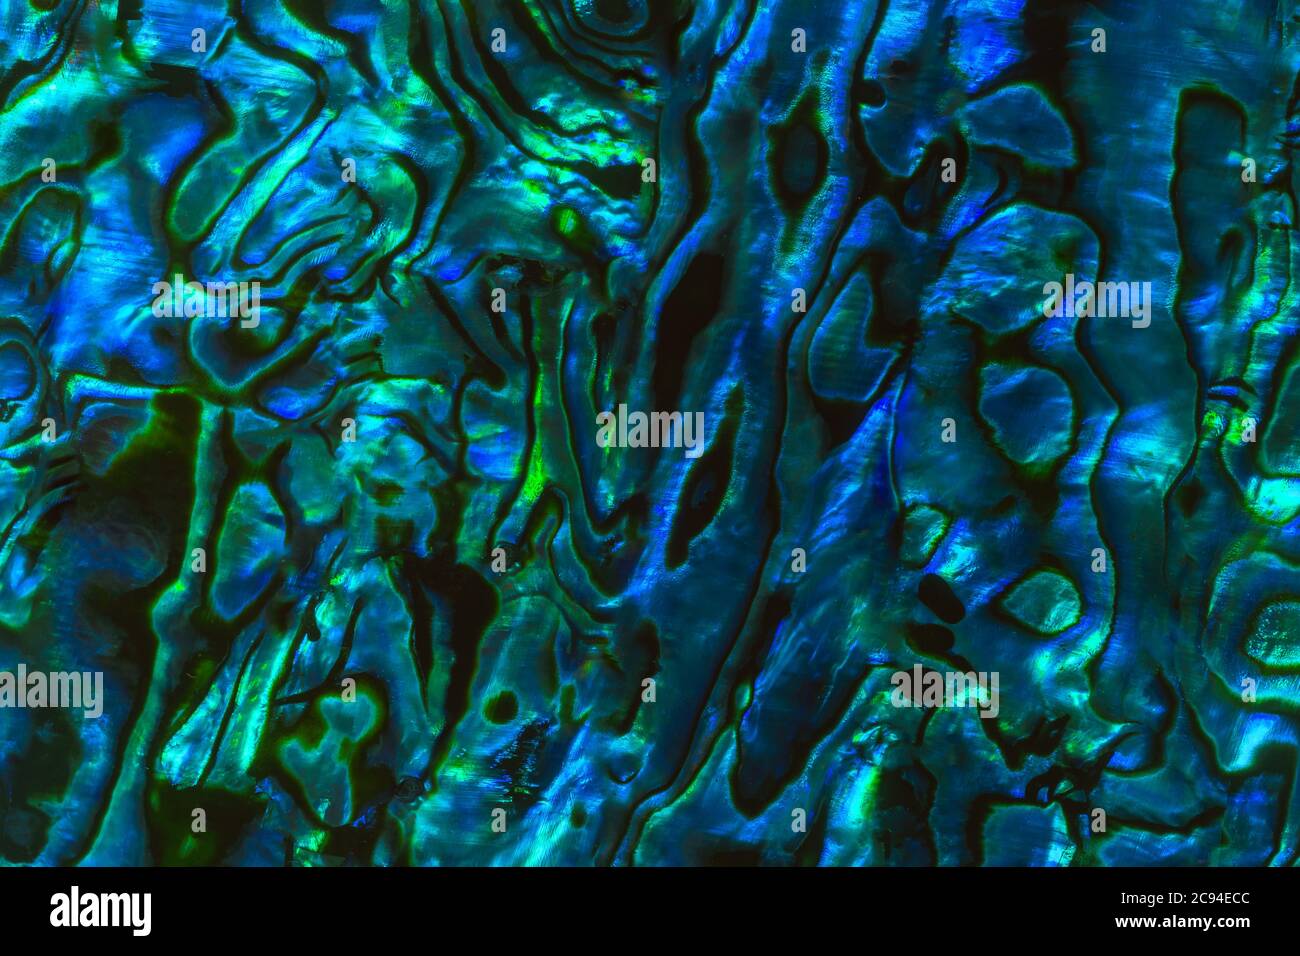 Brightly coloured New Zealand Paua shell patterns. Paua is a large mollusc found in coastal waters and is known as abalone in other parts of the world Stock Photo